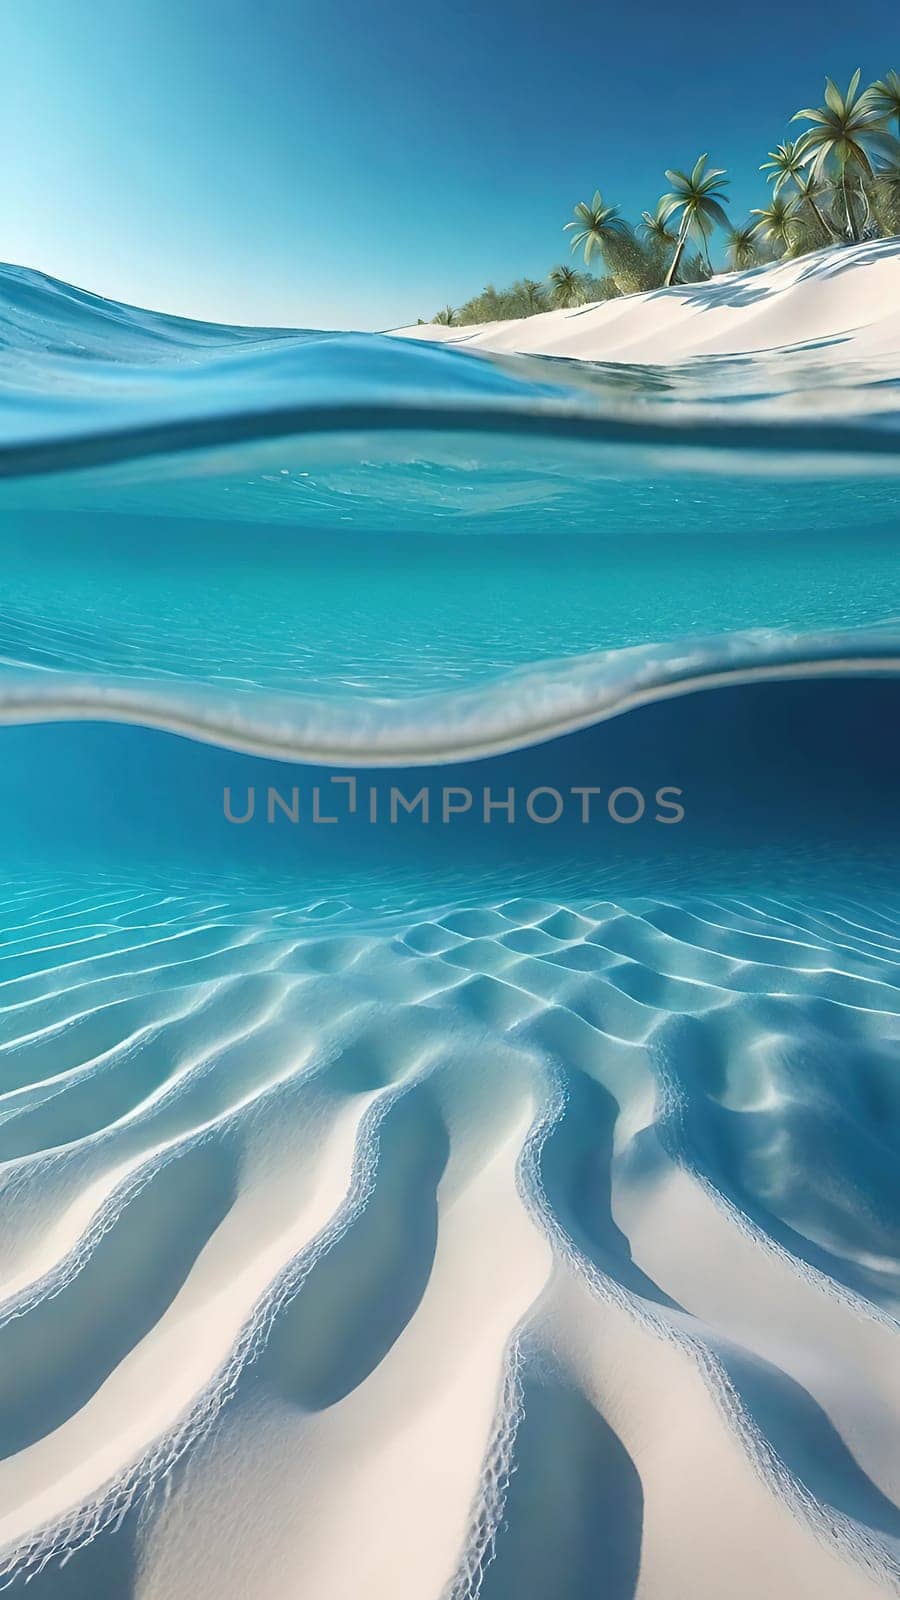 Underwater world. 3d render illustration.Underwater view of the sea with waves and sand.